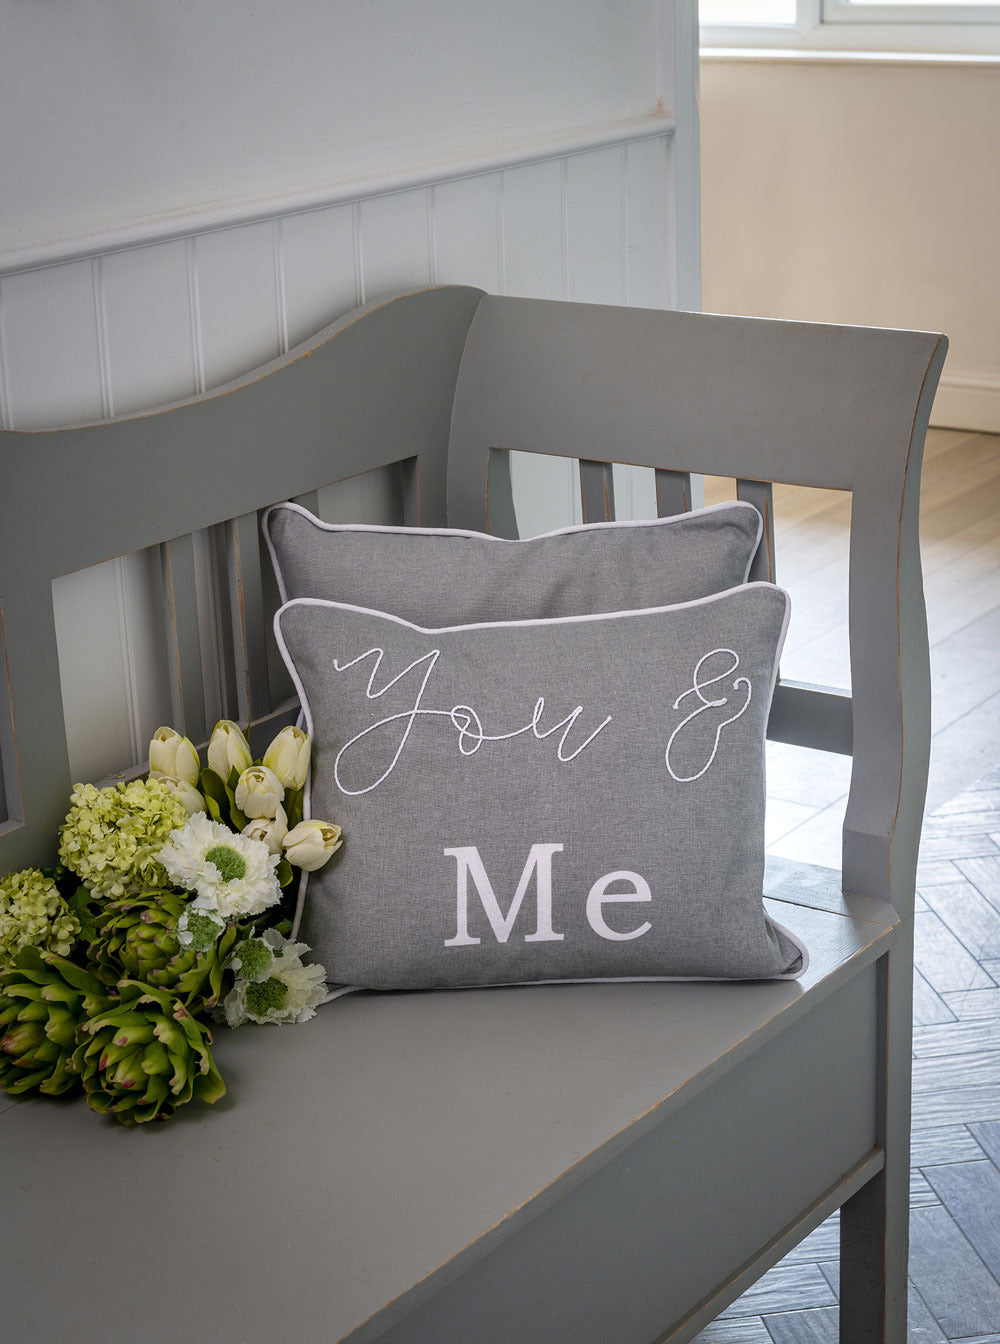 You and Me Cushion